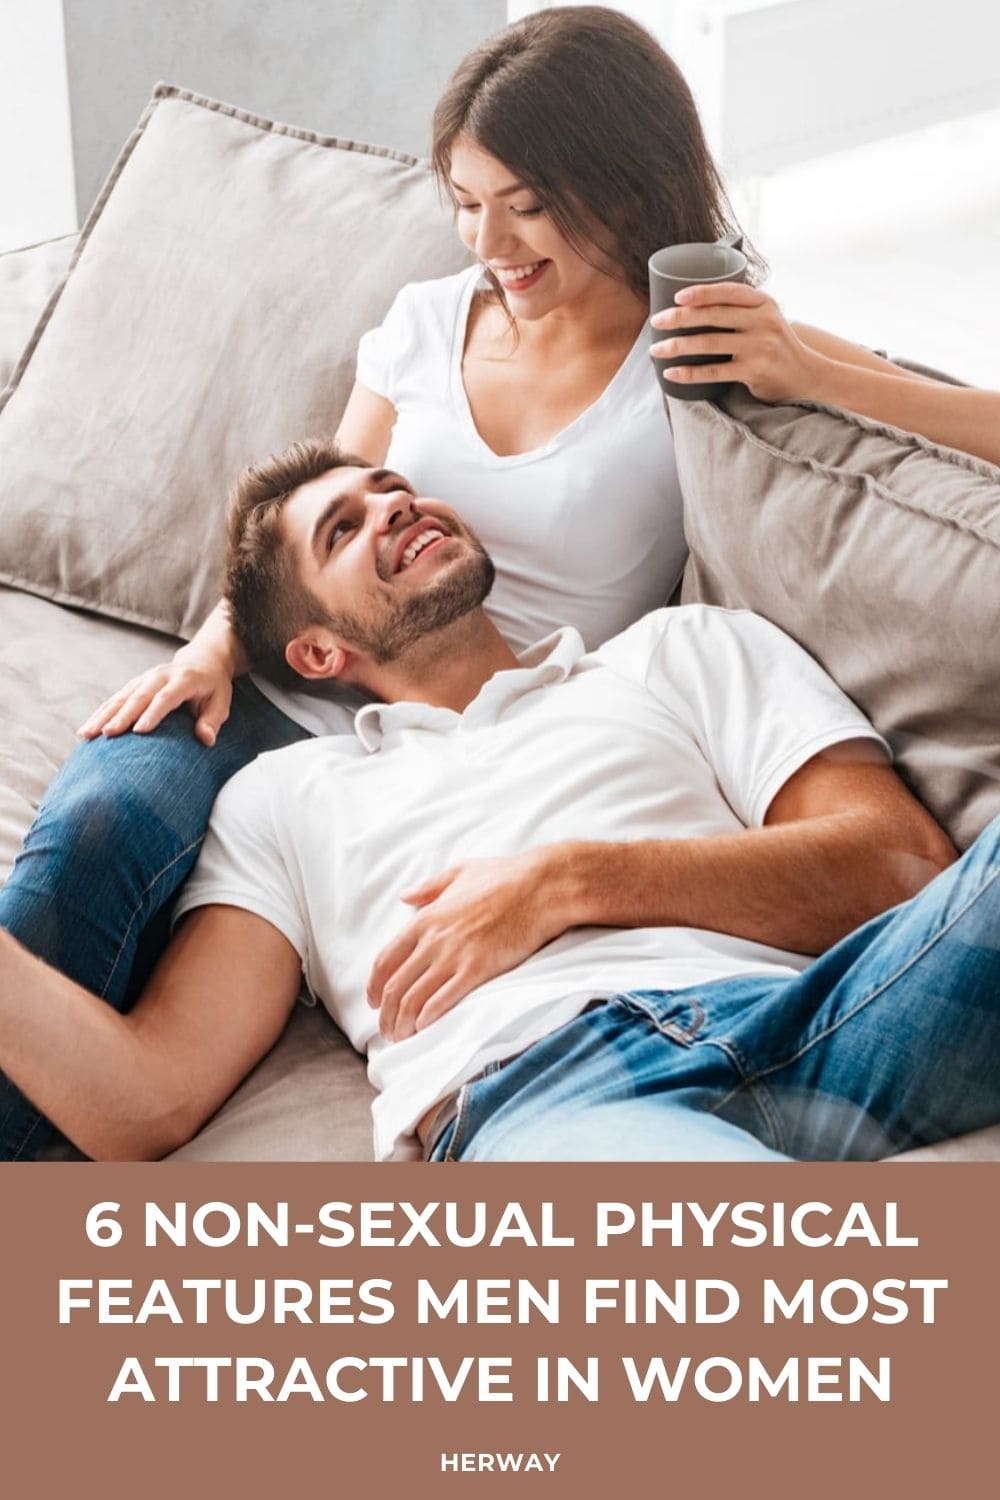 6 Non-Sexual Physical Features Men Find Most Attractive In Women